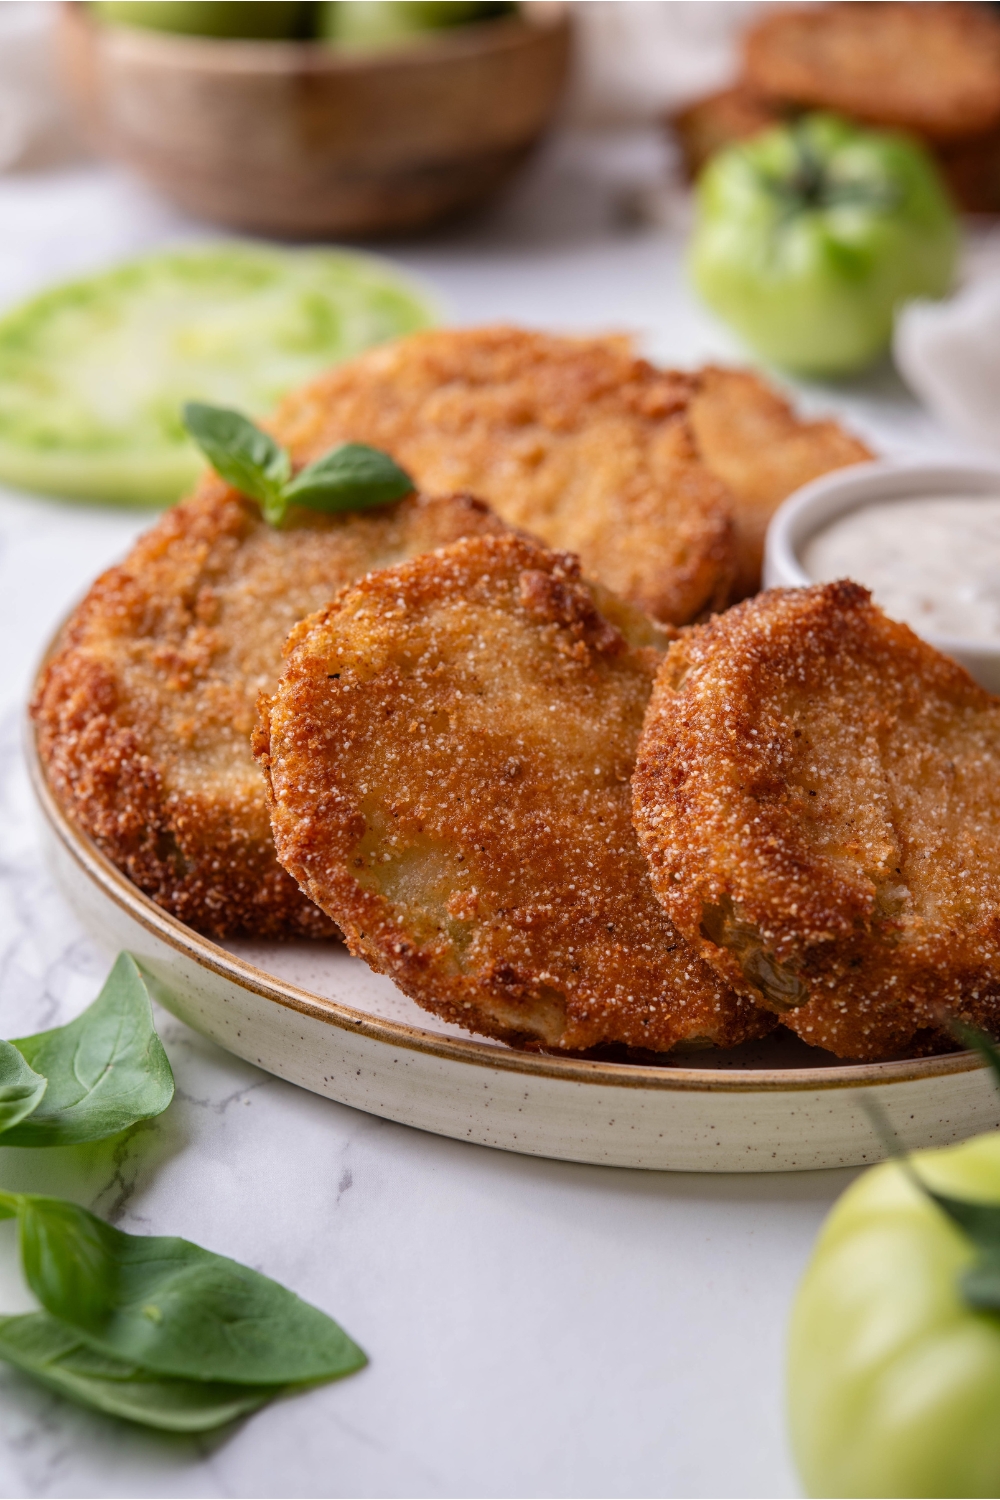 Three slices of breaded and fried green tomatoes overlapping each other on a plate with a small bowl of dipping sauce and a garnish of green herbs.